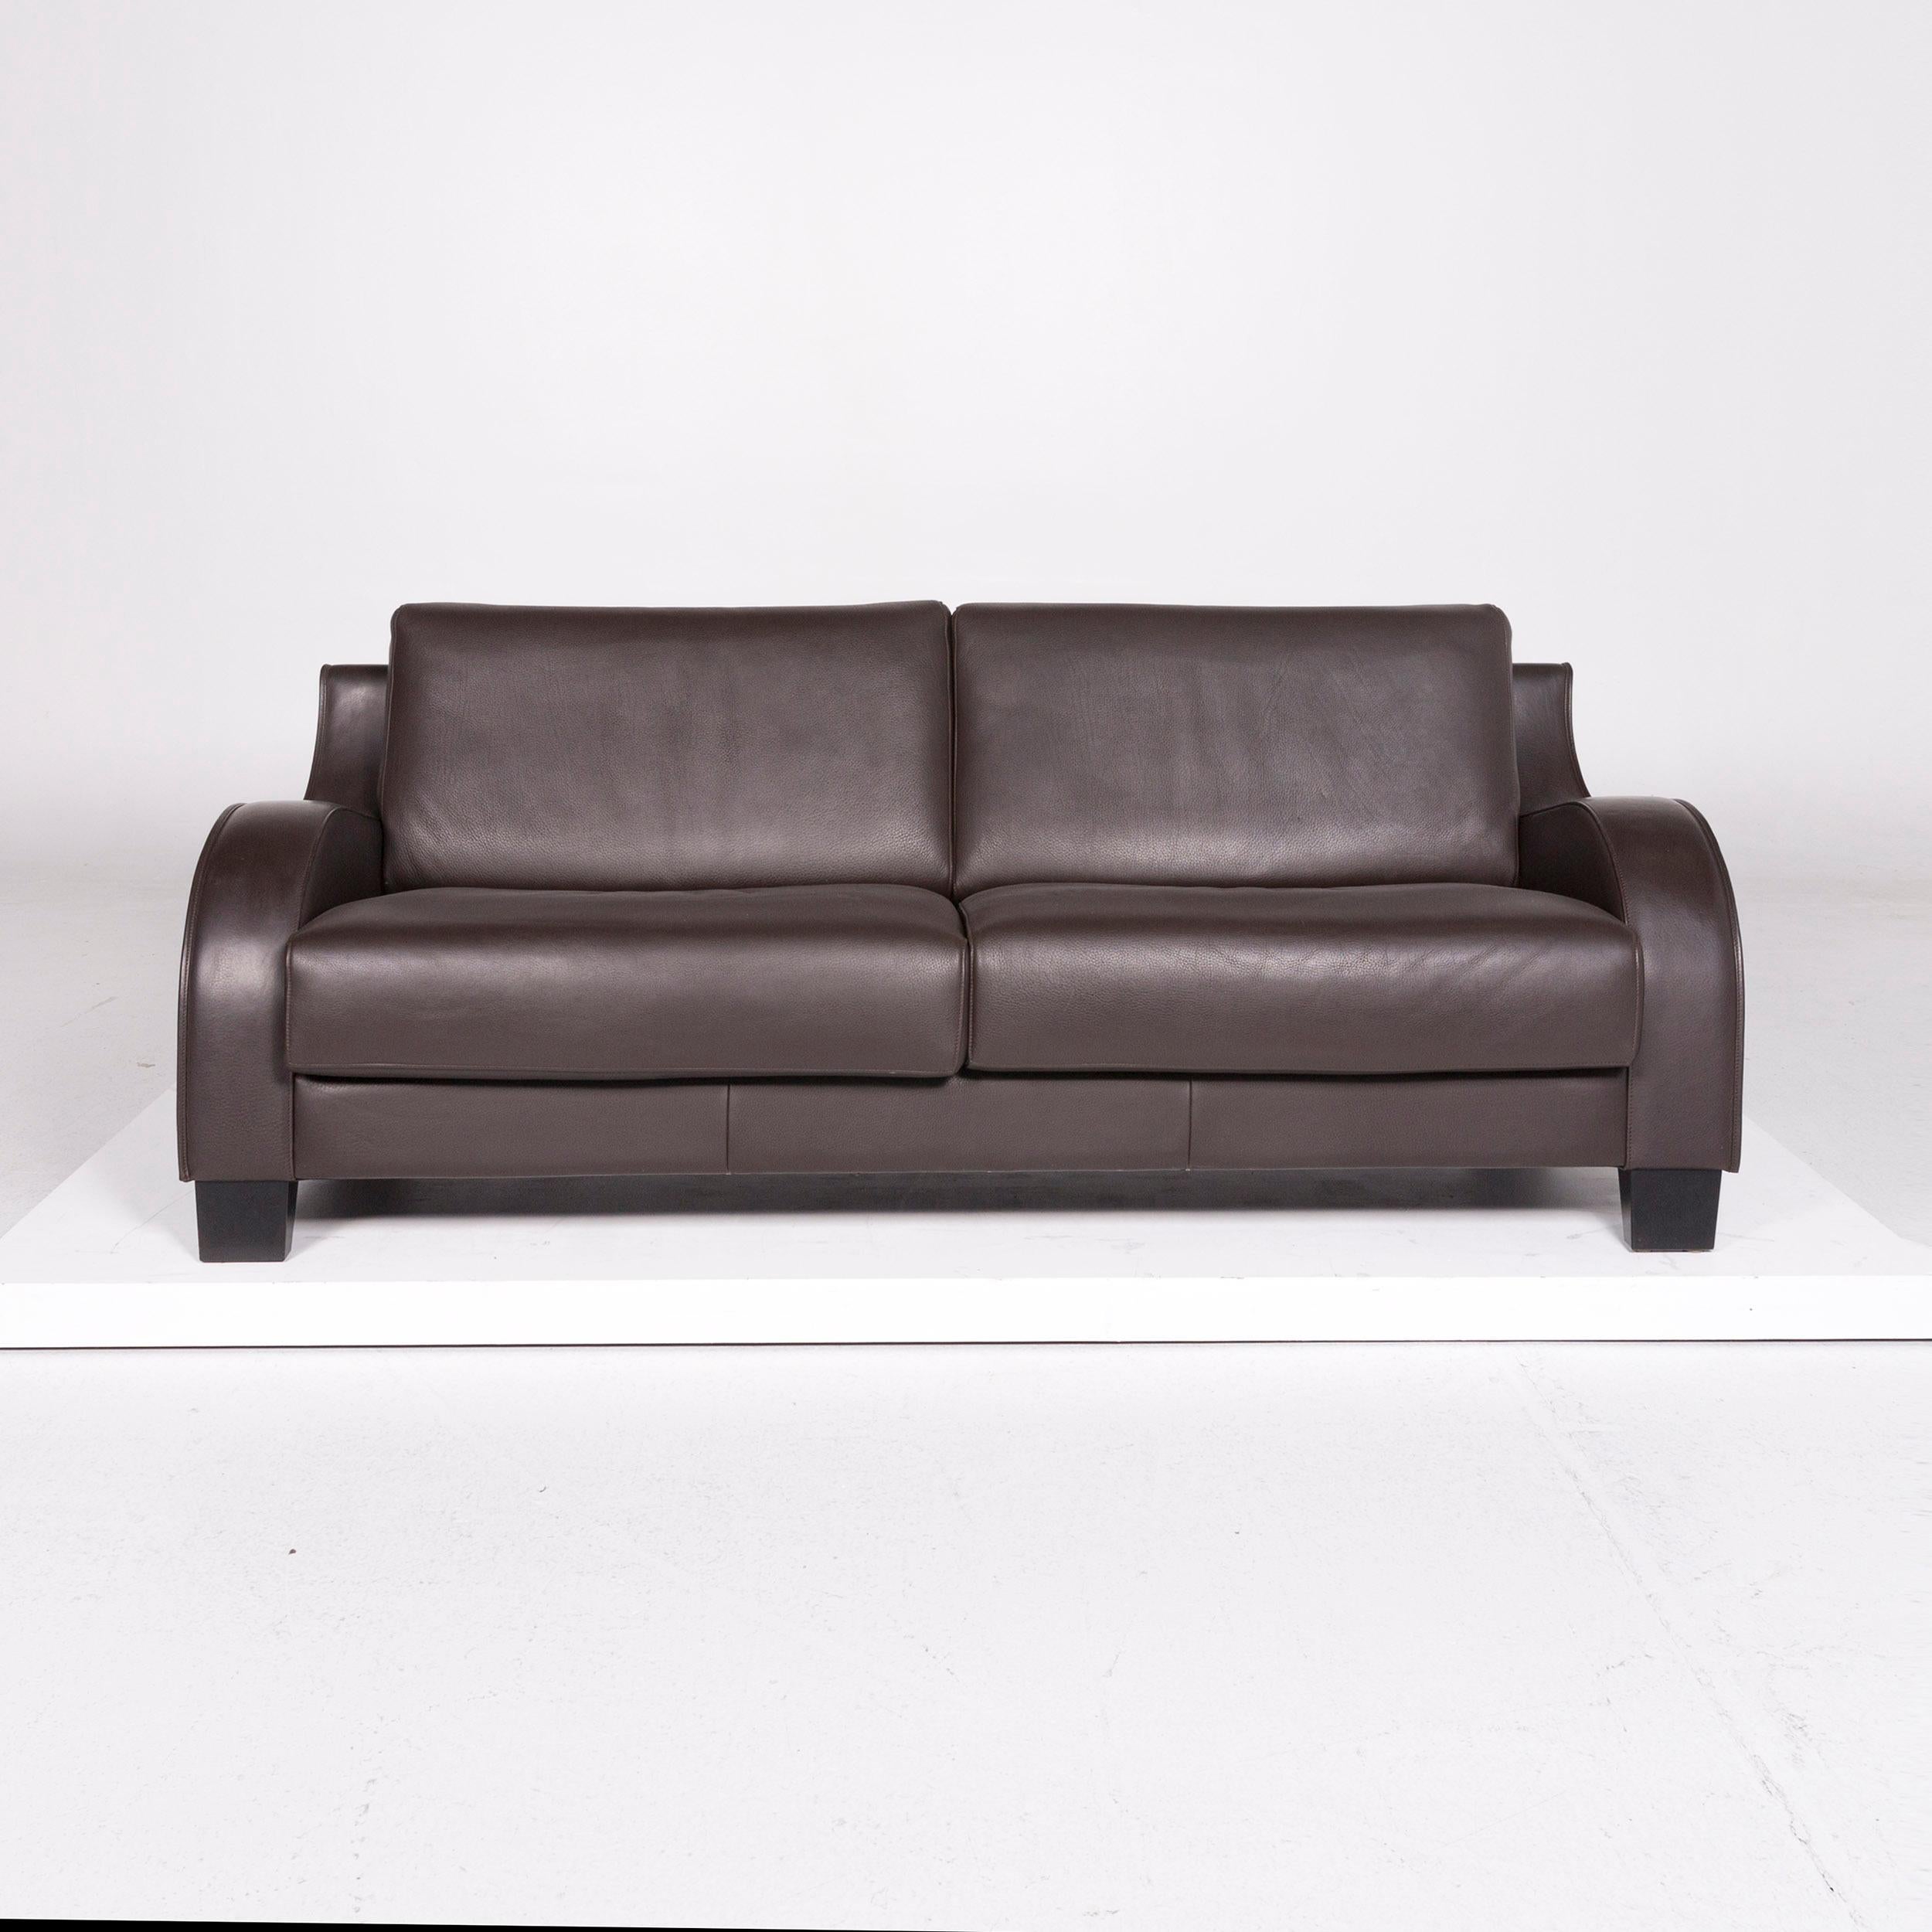 We bring to you a de Sede DS 122 leather sofa set brown dark brown 1 two-seat 2 armchair.

 Product measurements in centimeters:
 
Depth 91
Width 200
Height 80
Seat-height 44
Rest-height 55
Seat-depth 54
Seat-width 170
Back-height 37.
 